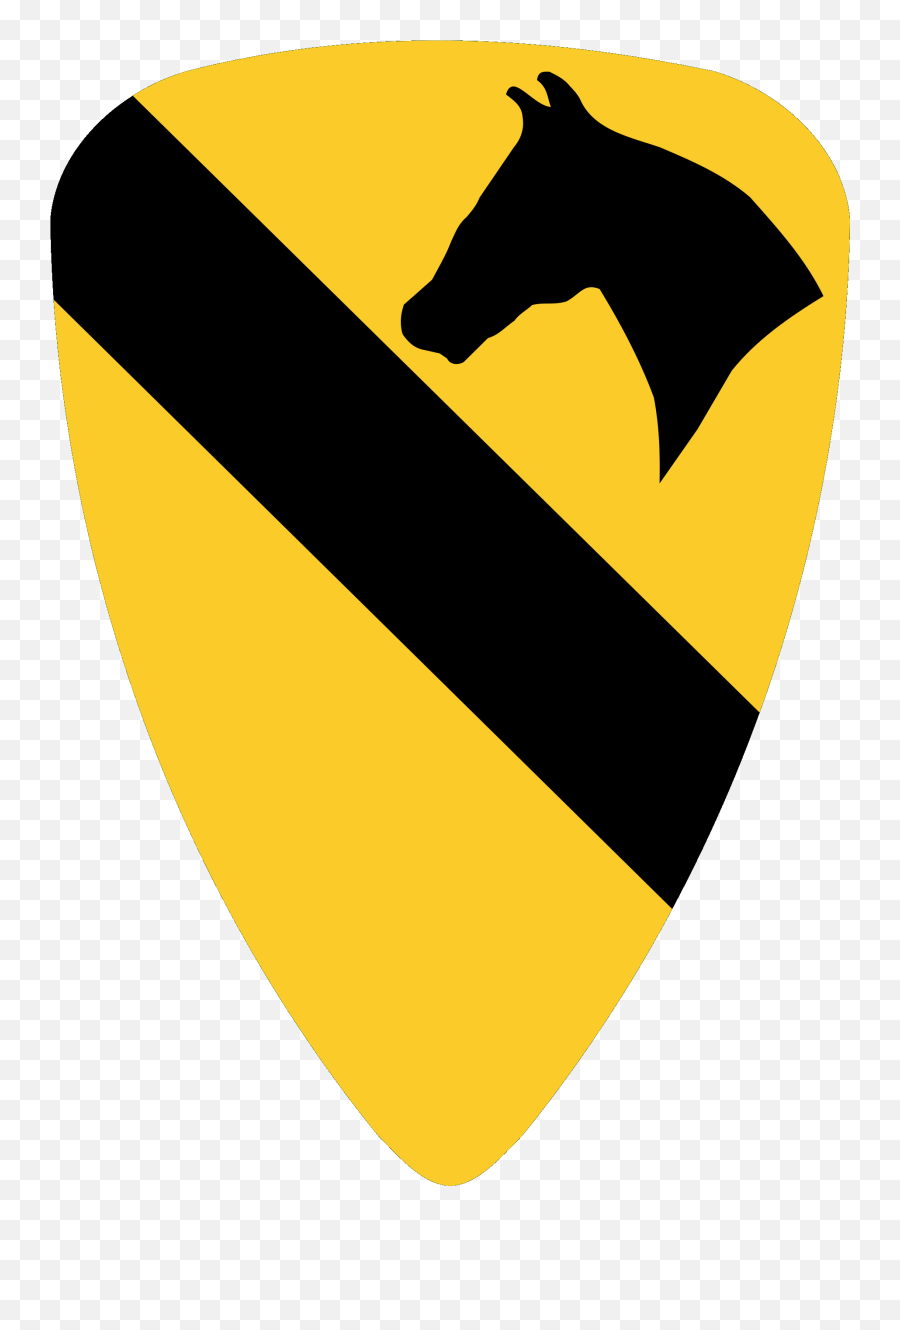 1st Cavalry Division - 1st Cav Logo Png Clipart Full Size 1st Cav Patch Emoji,2 Medal Emoji Png